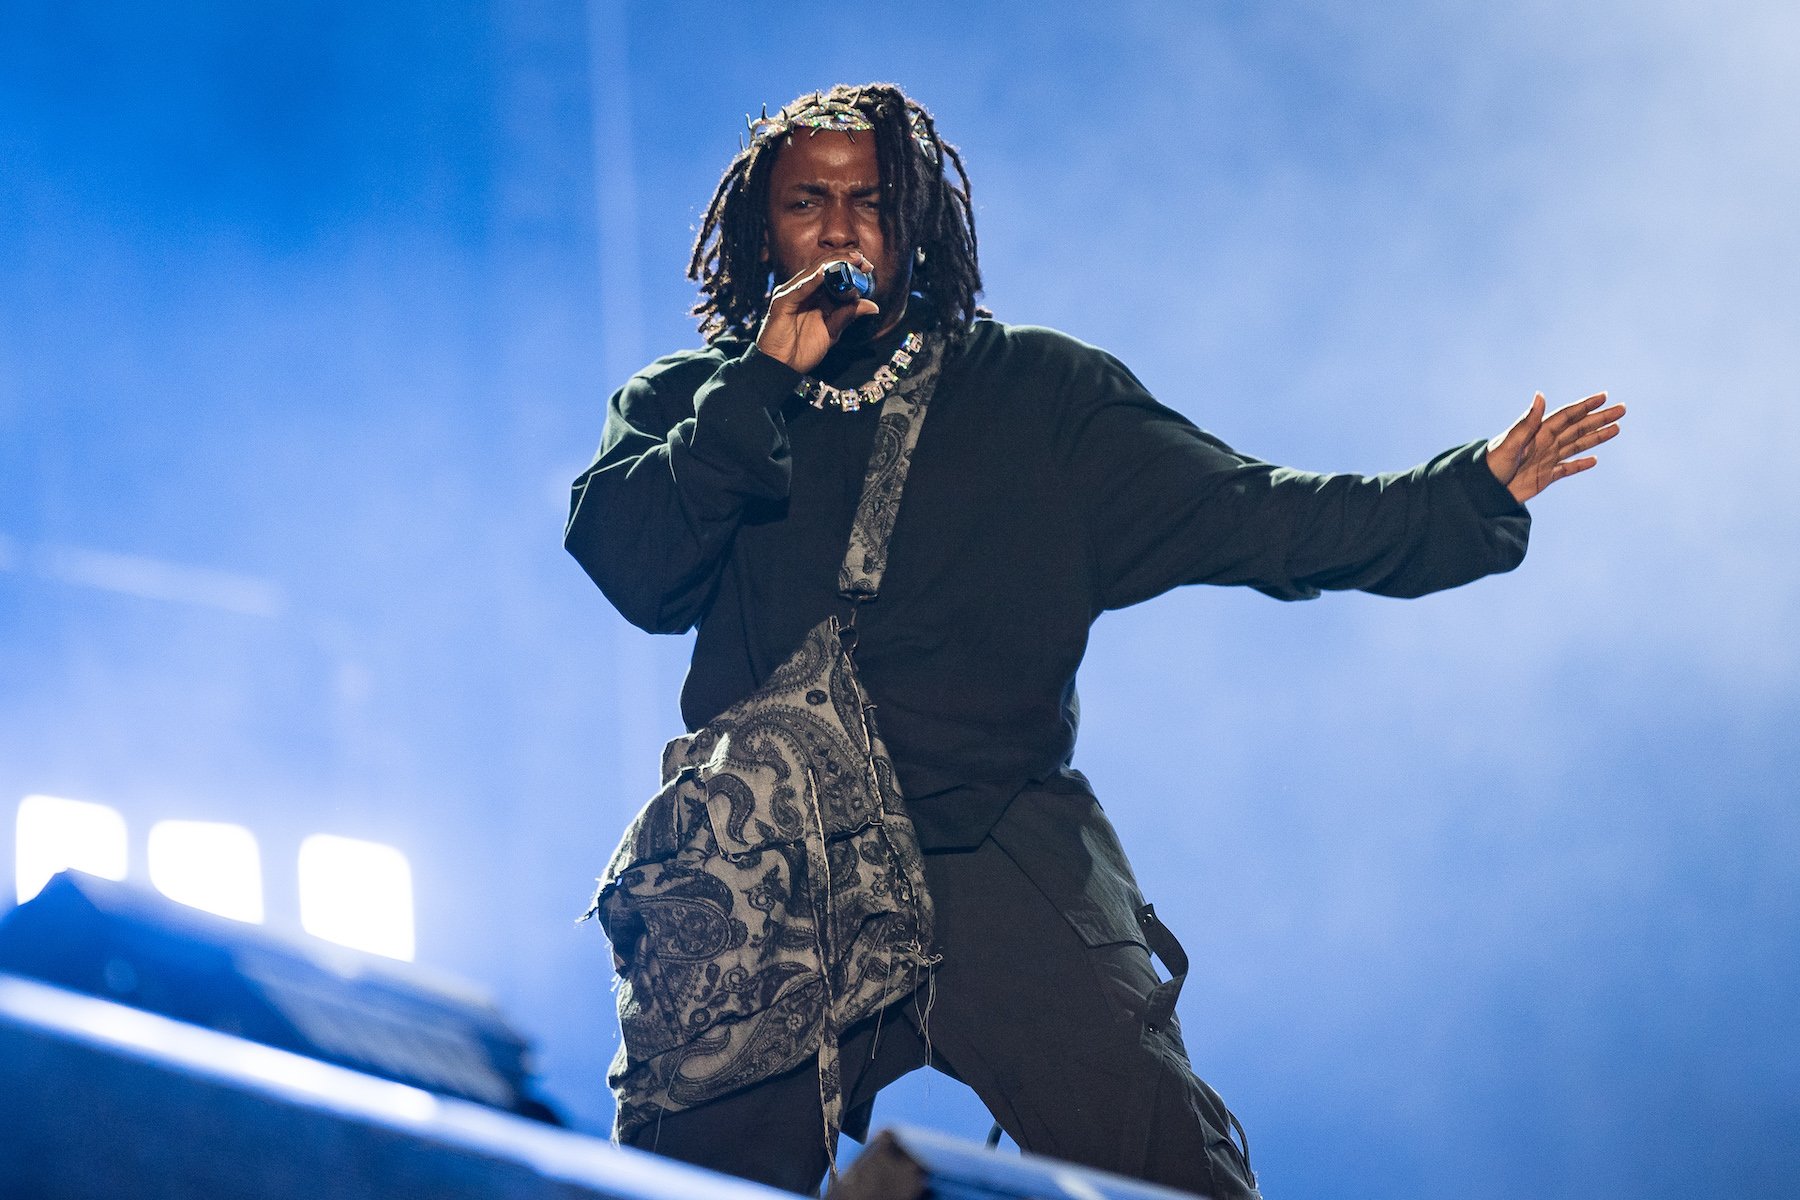 Kendrick Lamar, one of the Best Rap Album nominees at the 2023 Grammy Awards, on stage performing